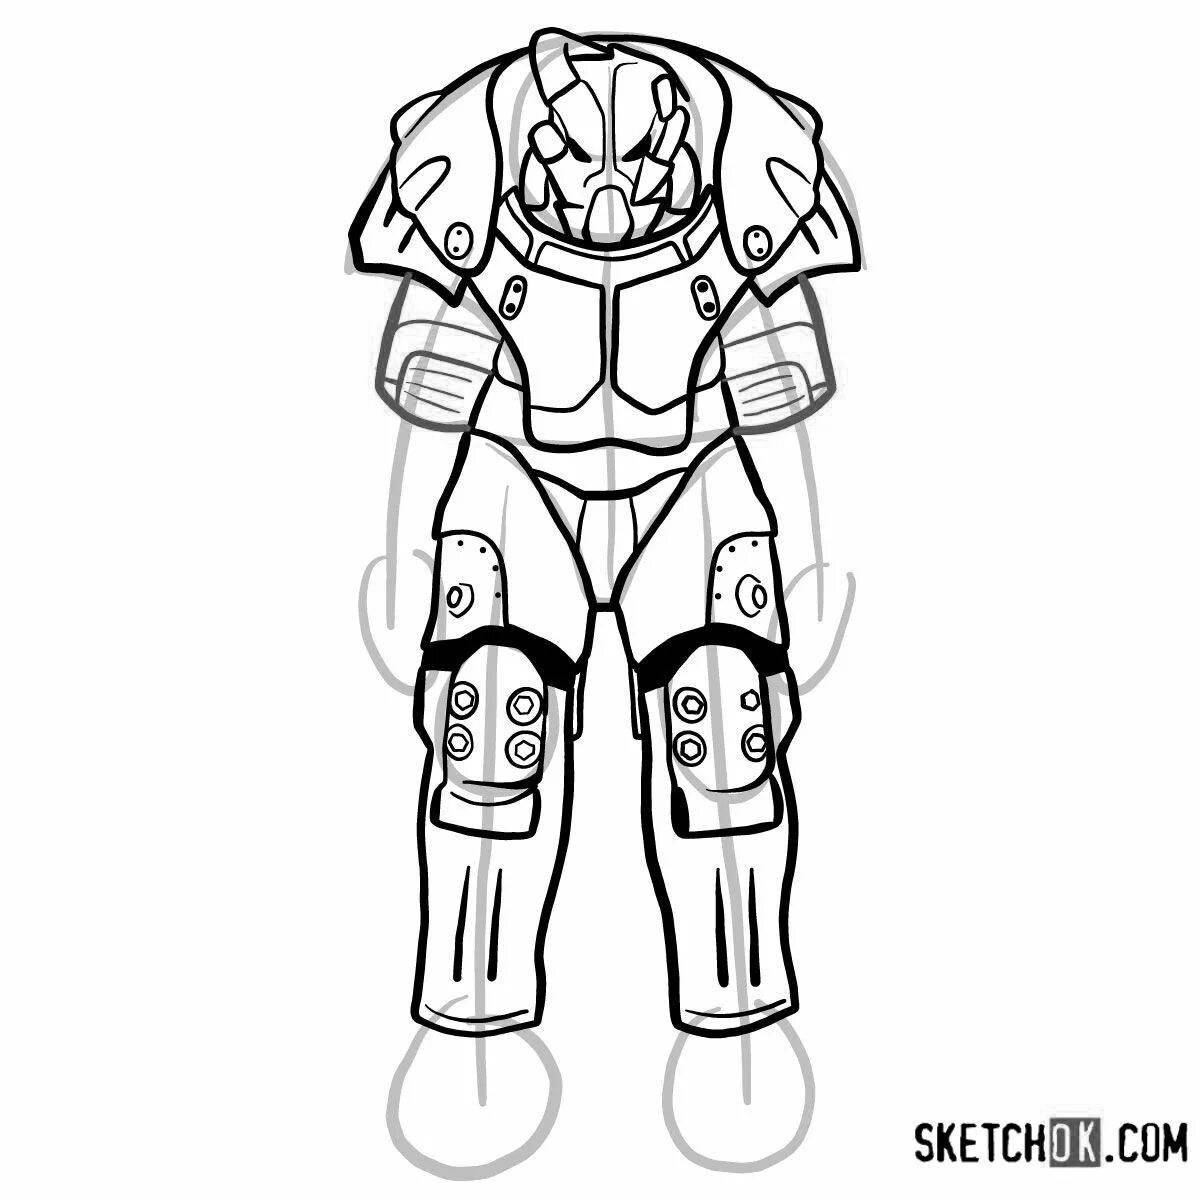 Majestic power armor fallout 4 coloring page